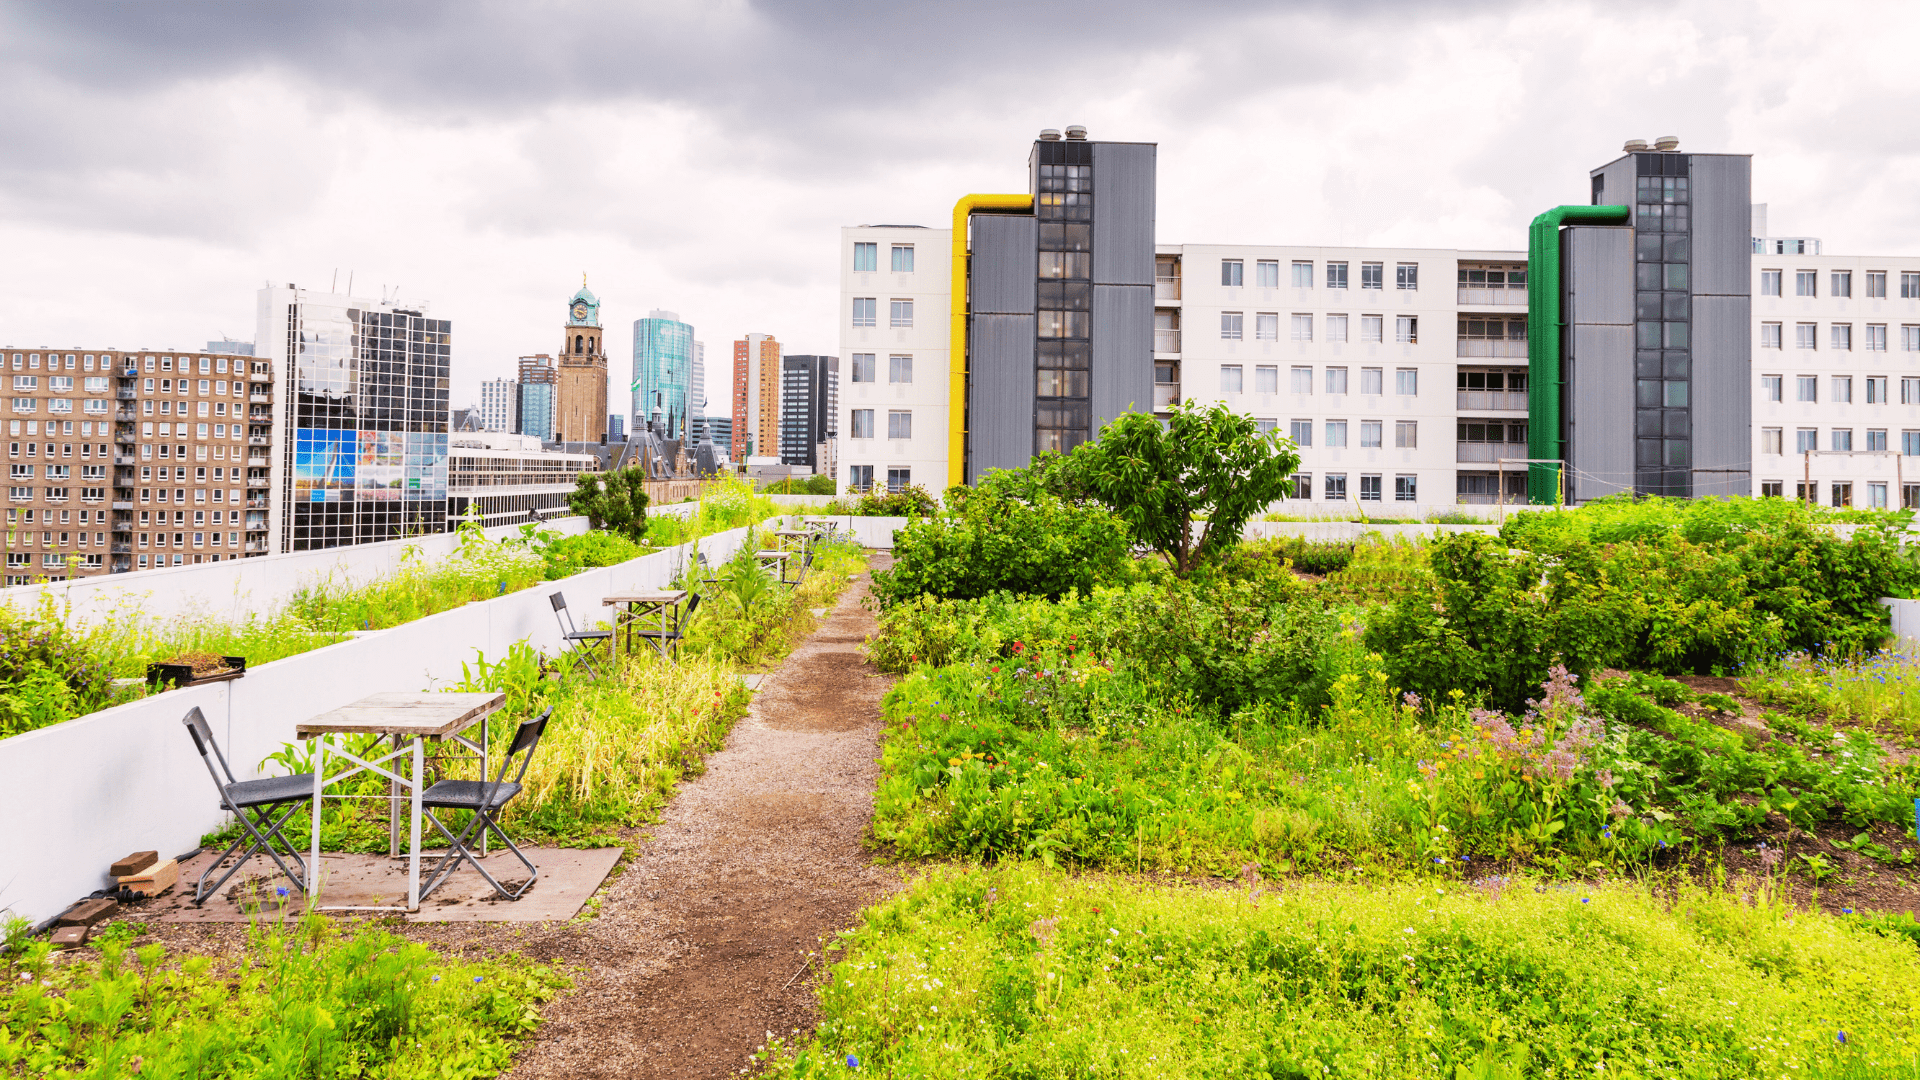 Urban landscapre from roof top with intensive green roof